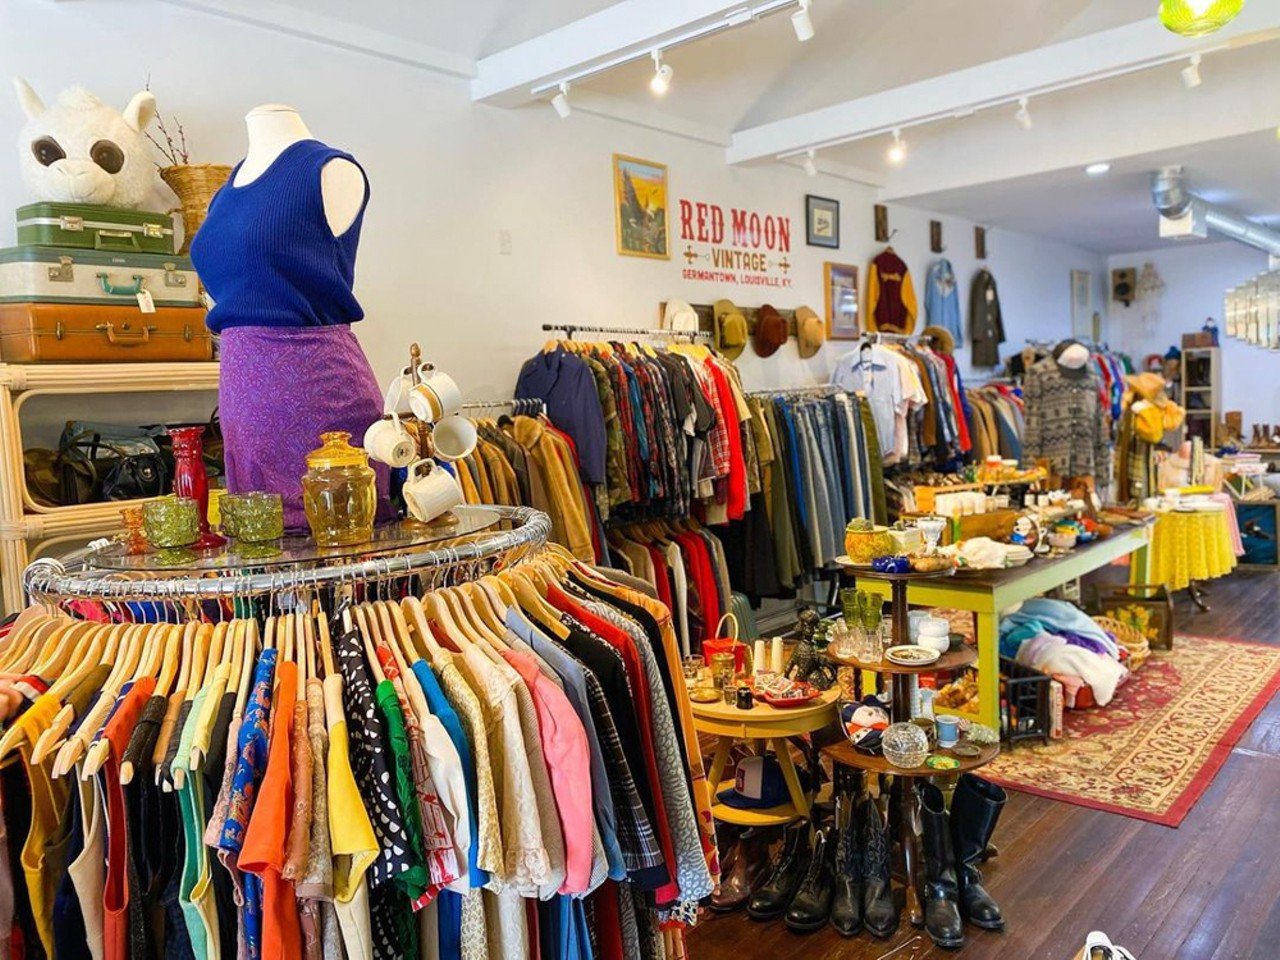  Go thrifting or vintage clothes shopping 
Find new clothes in your own style while saving money. (For a headstart on where to look, check out our  list  of 25 essential vintage shops in and around Louisville.)
Photo via theneonflea/Instagram